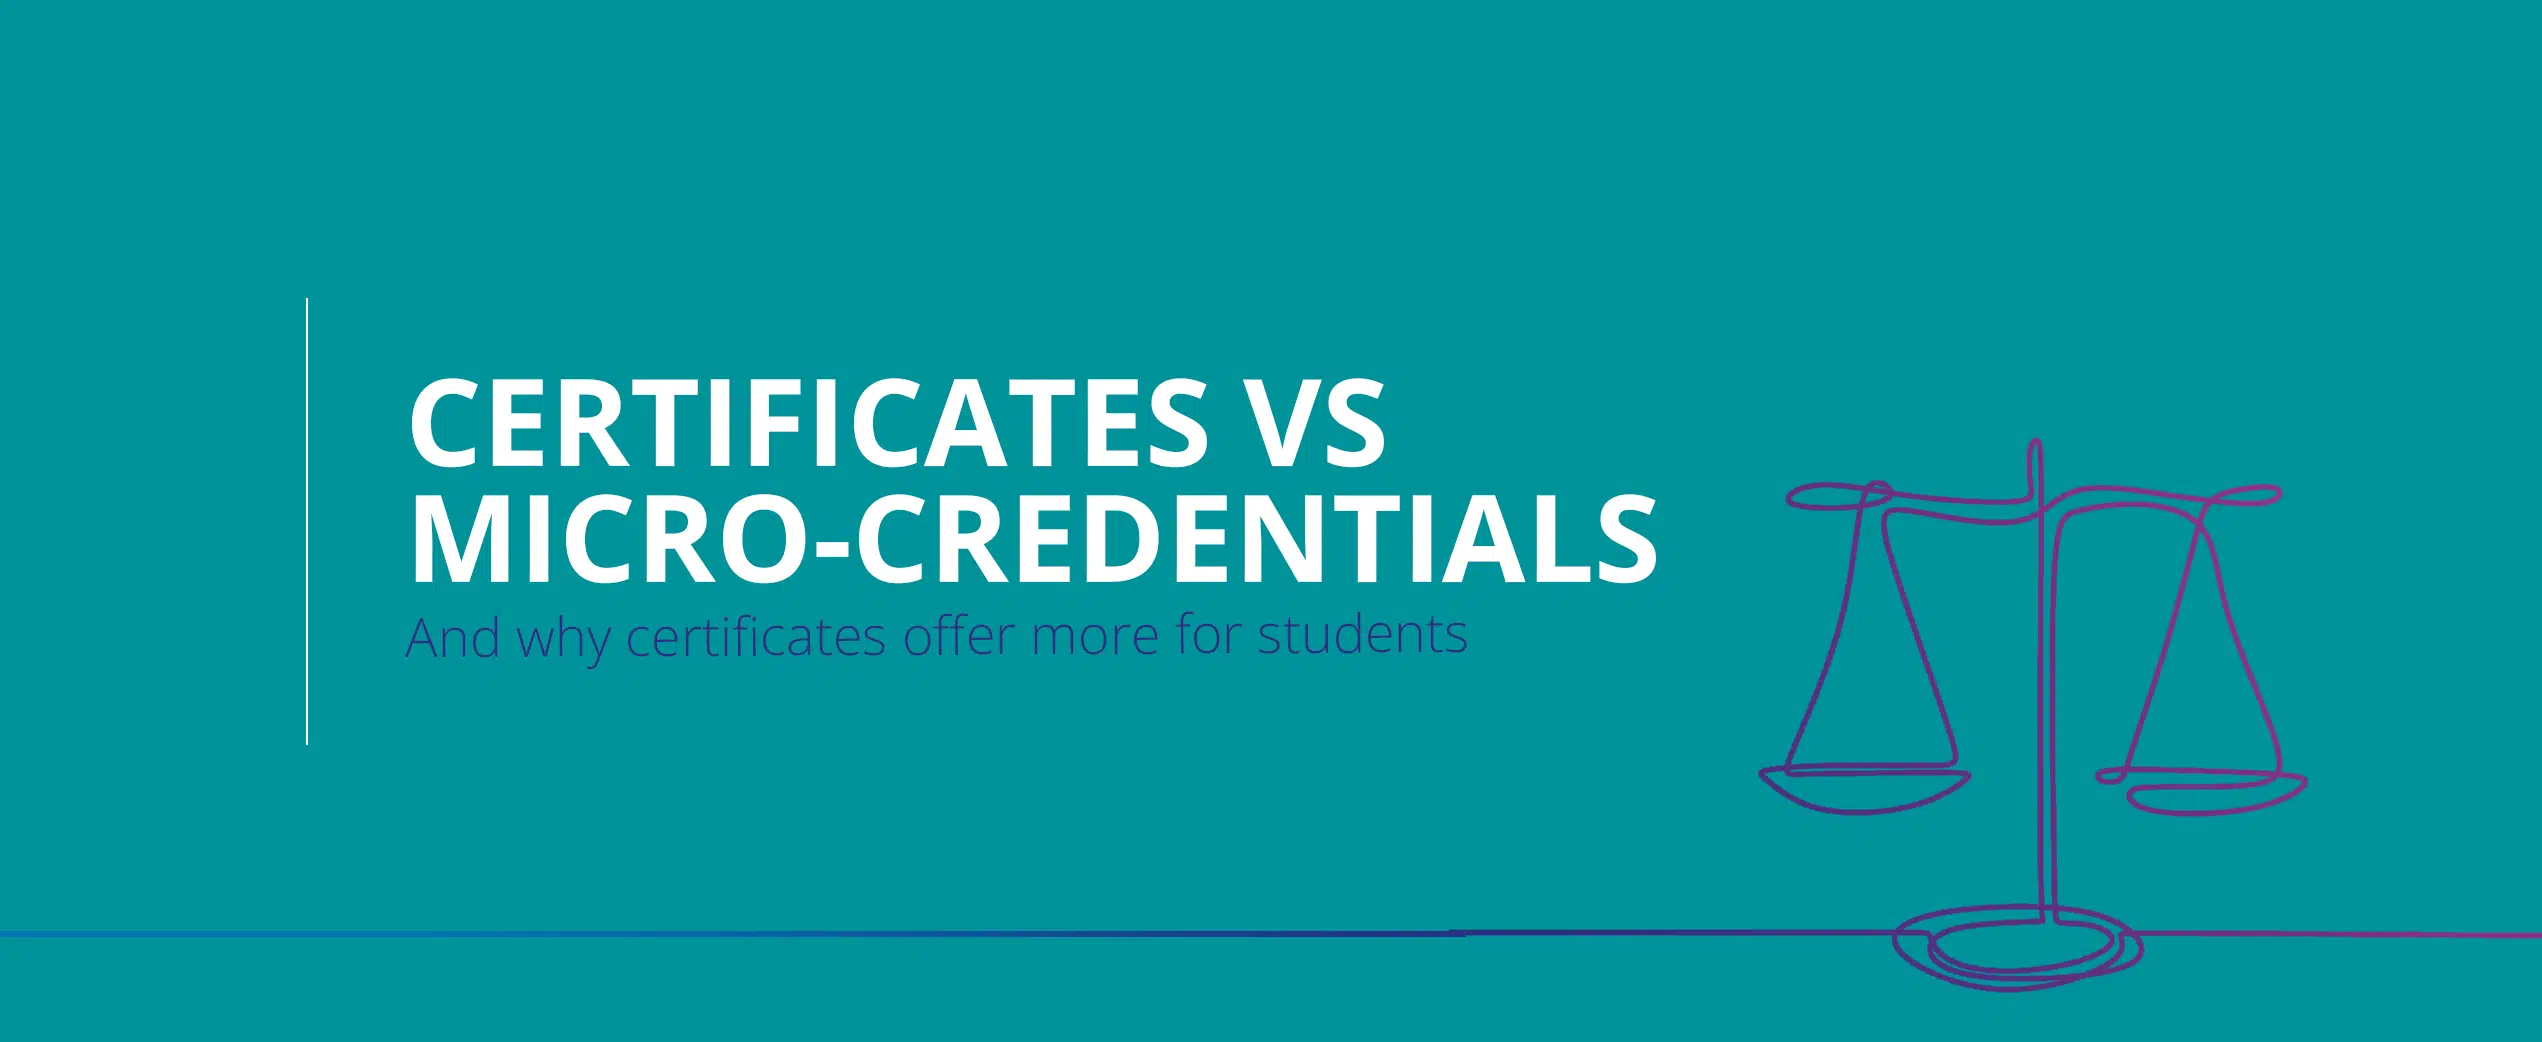 Certificates vs micro-credentials — and why certificates offer more for students